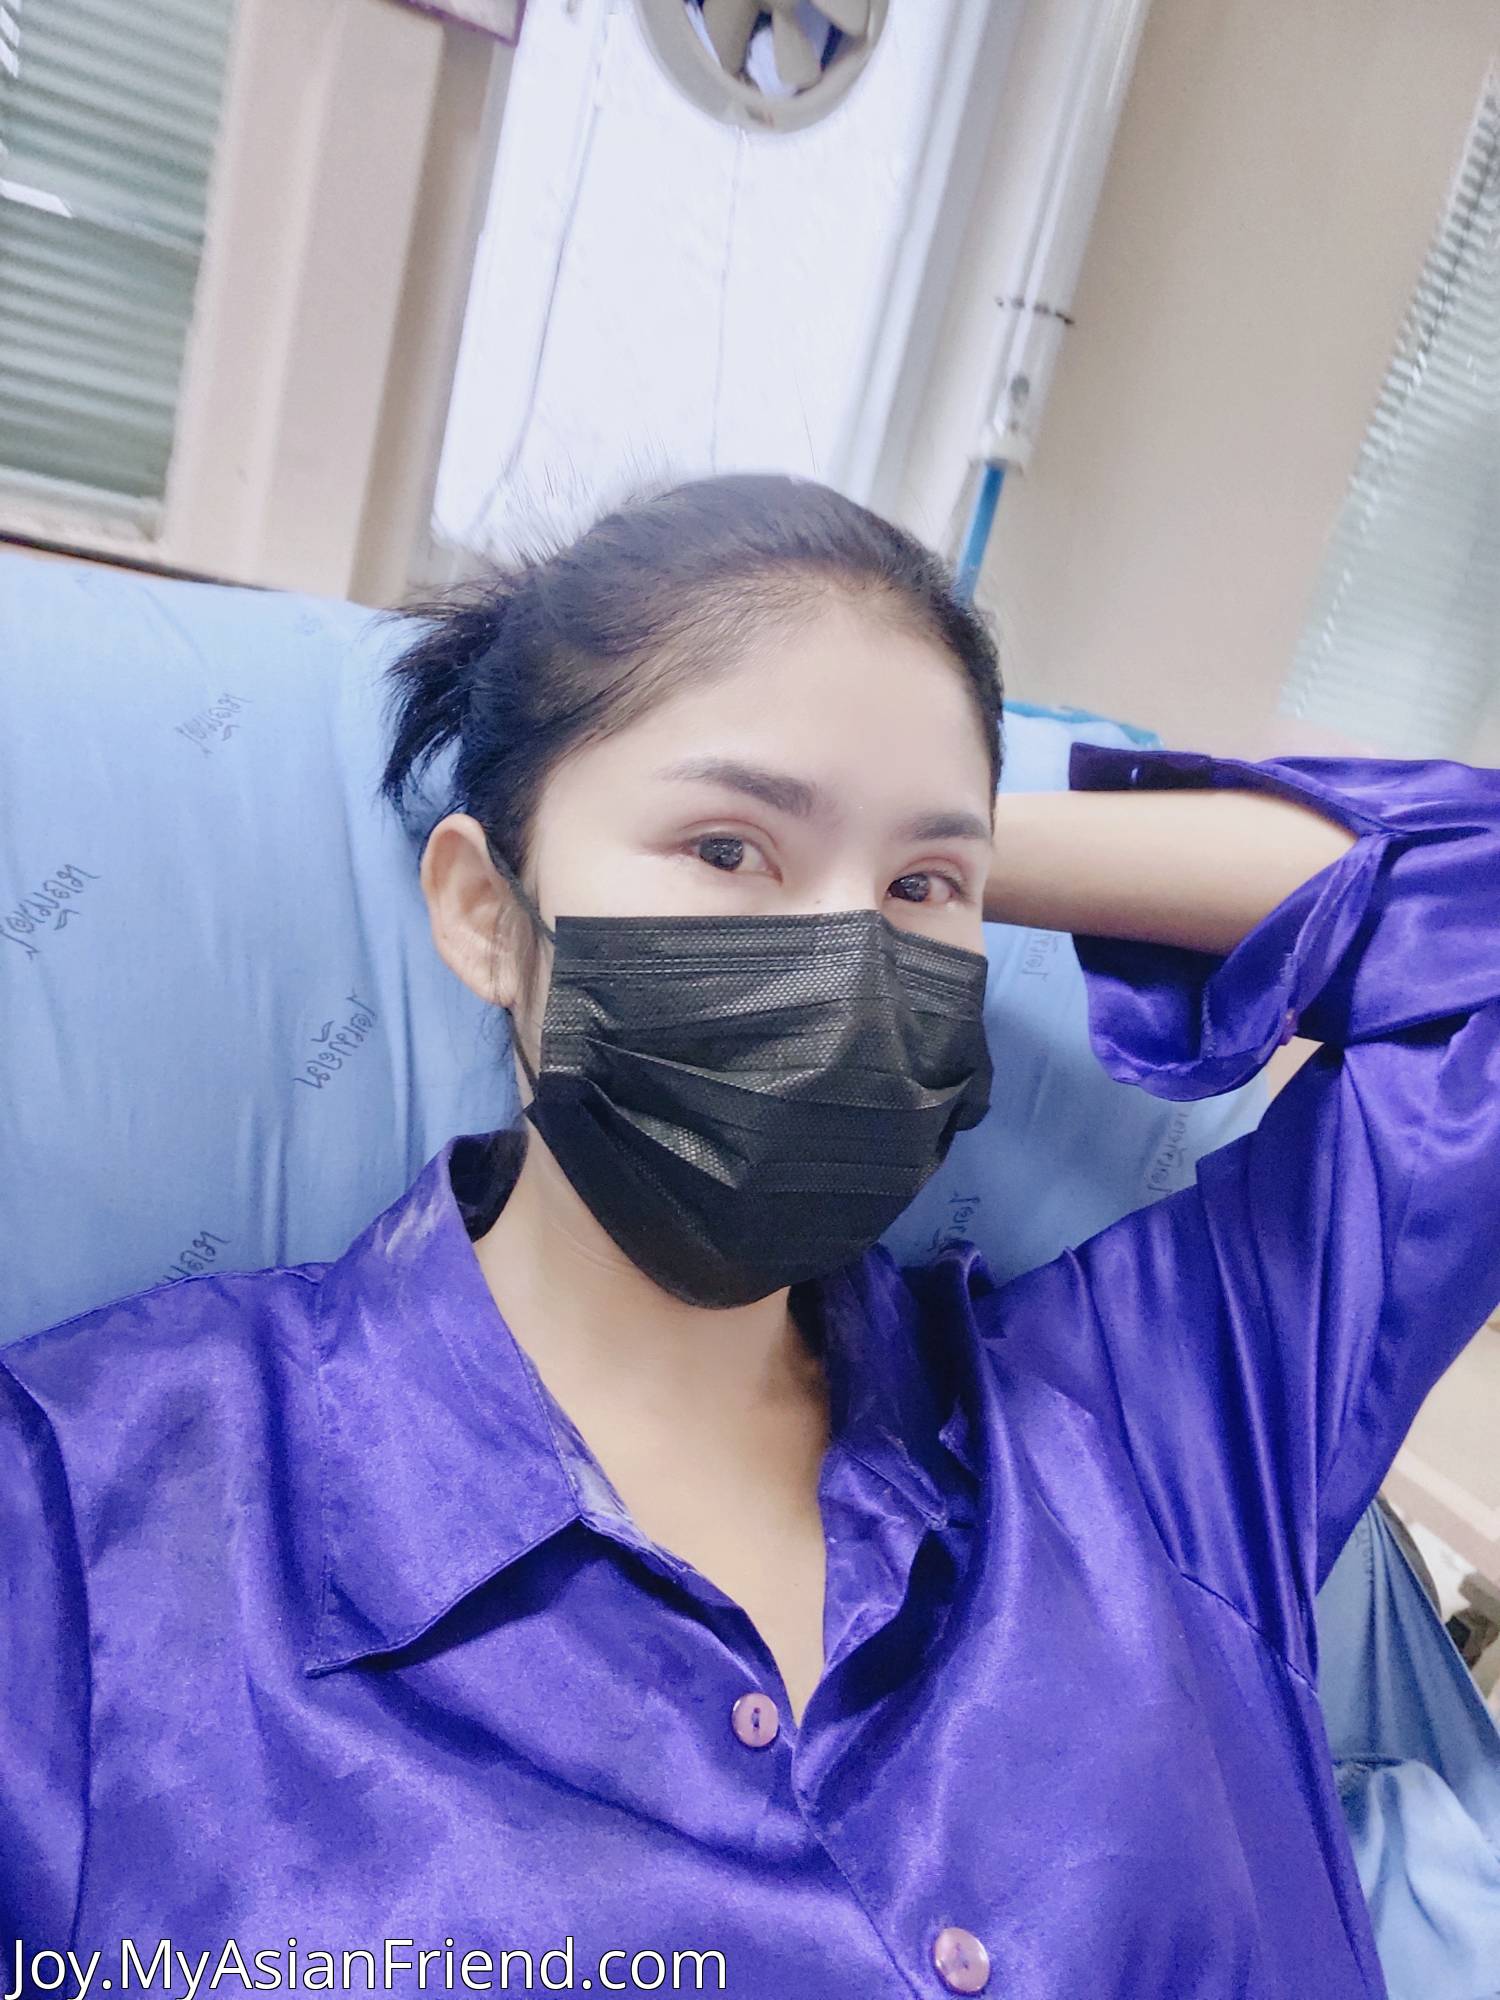 Joy's personal blog photo 1 added Sunday the 15th of May 2022